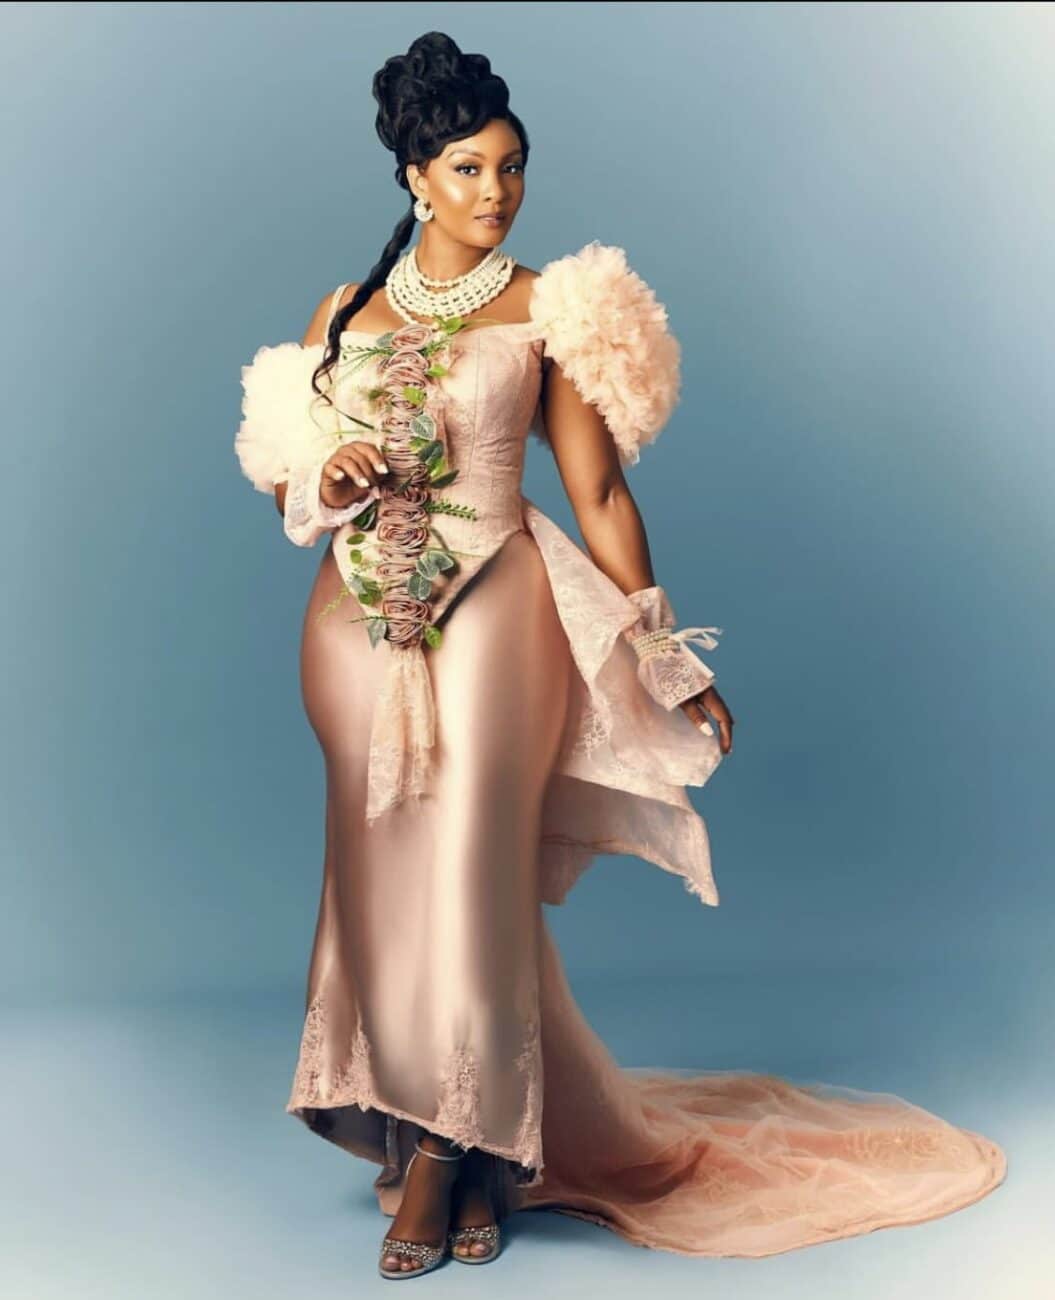 Osas Ighodaro in a silk number.